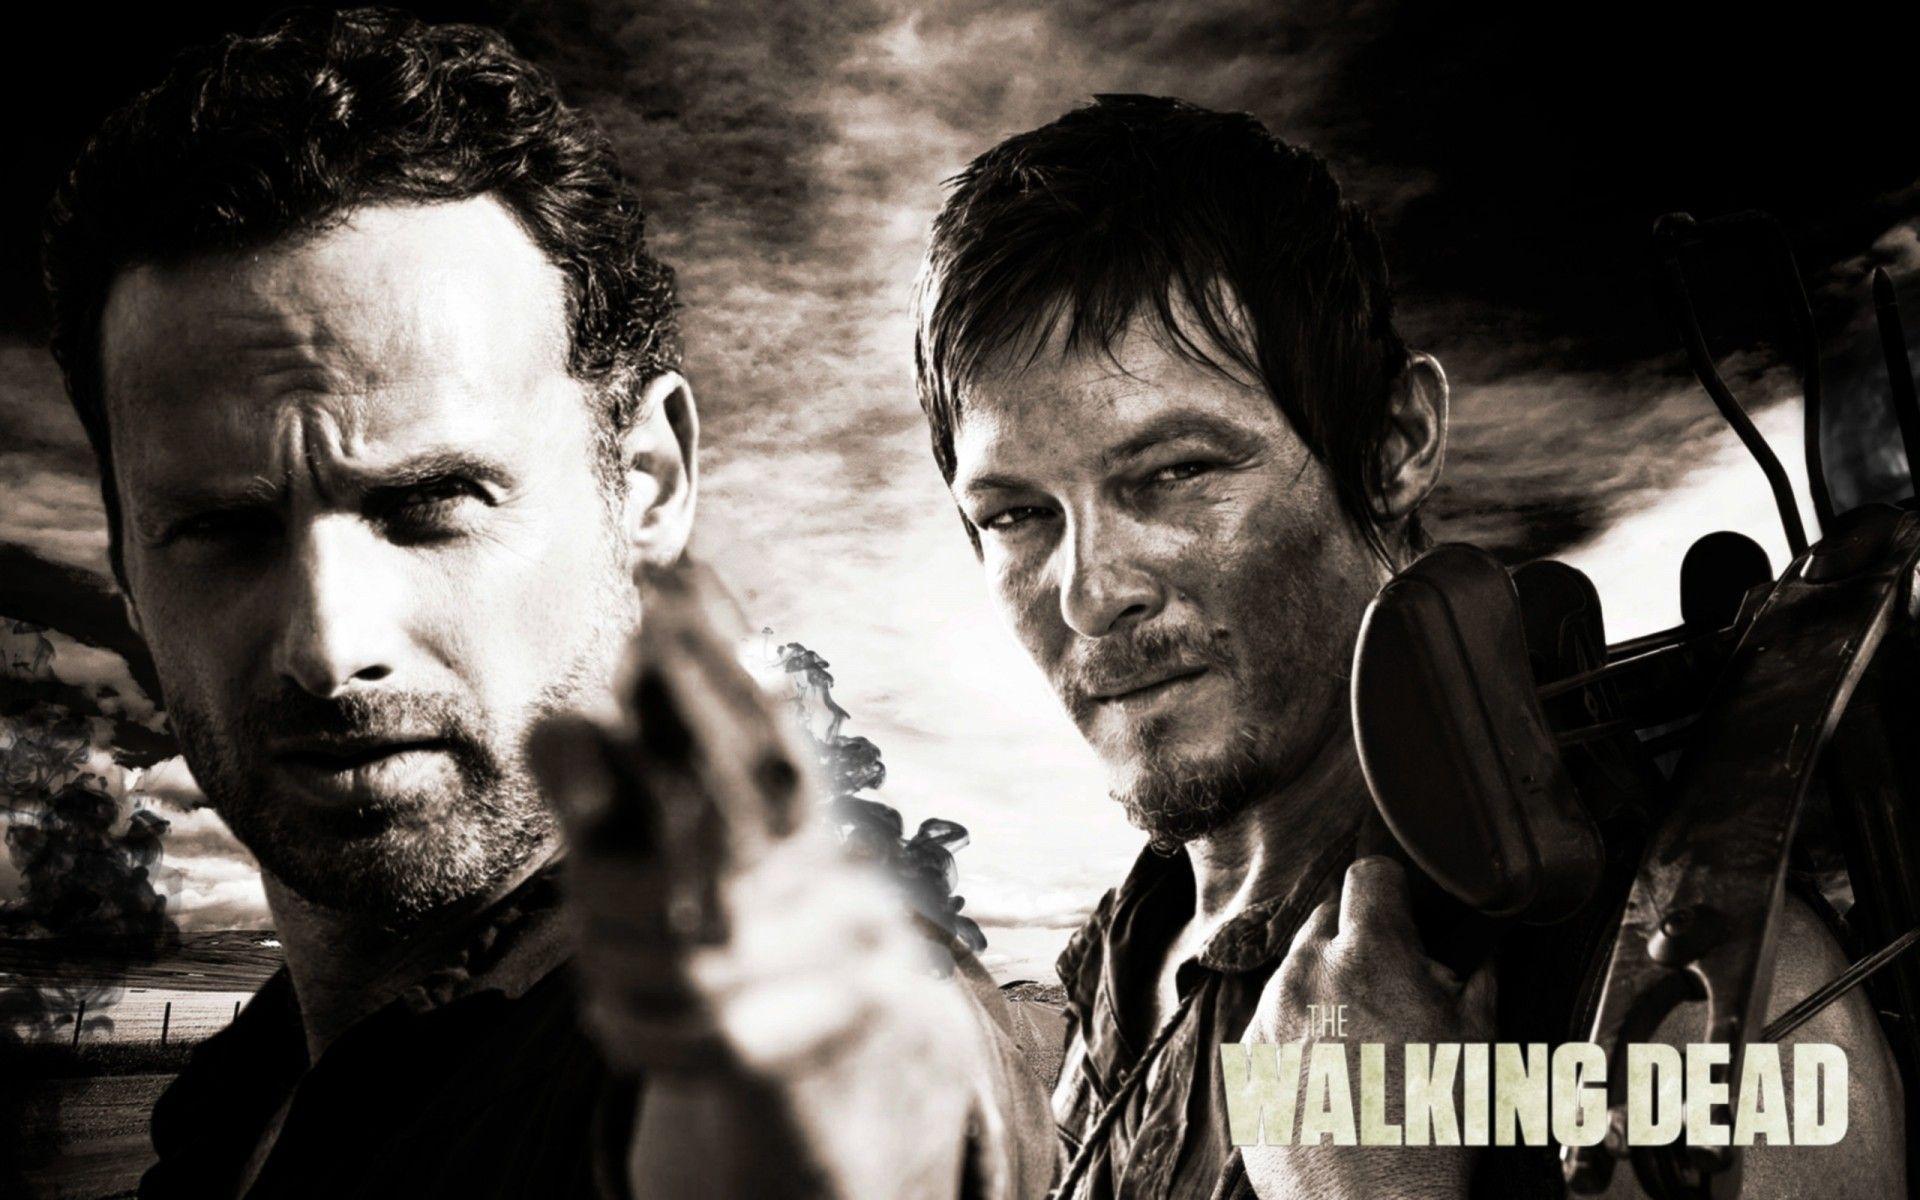 Rick and Daryl The Walking Dead. Android wallpaper for free